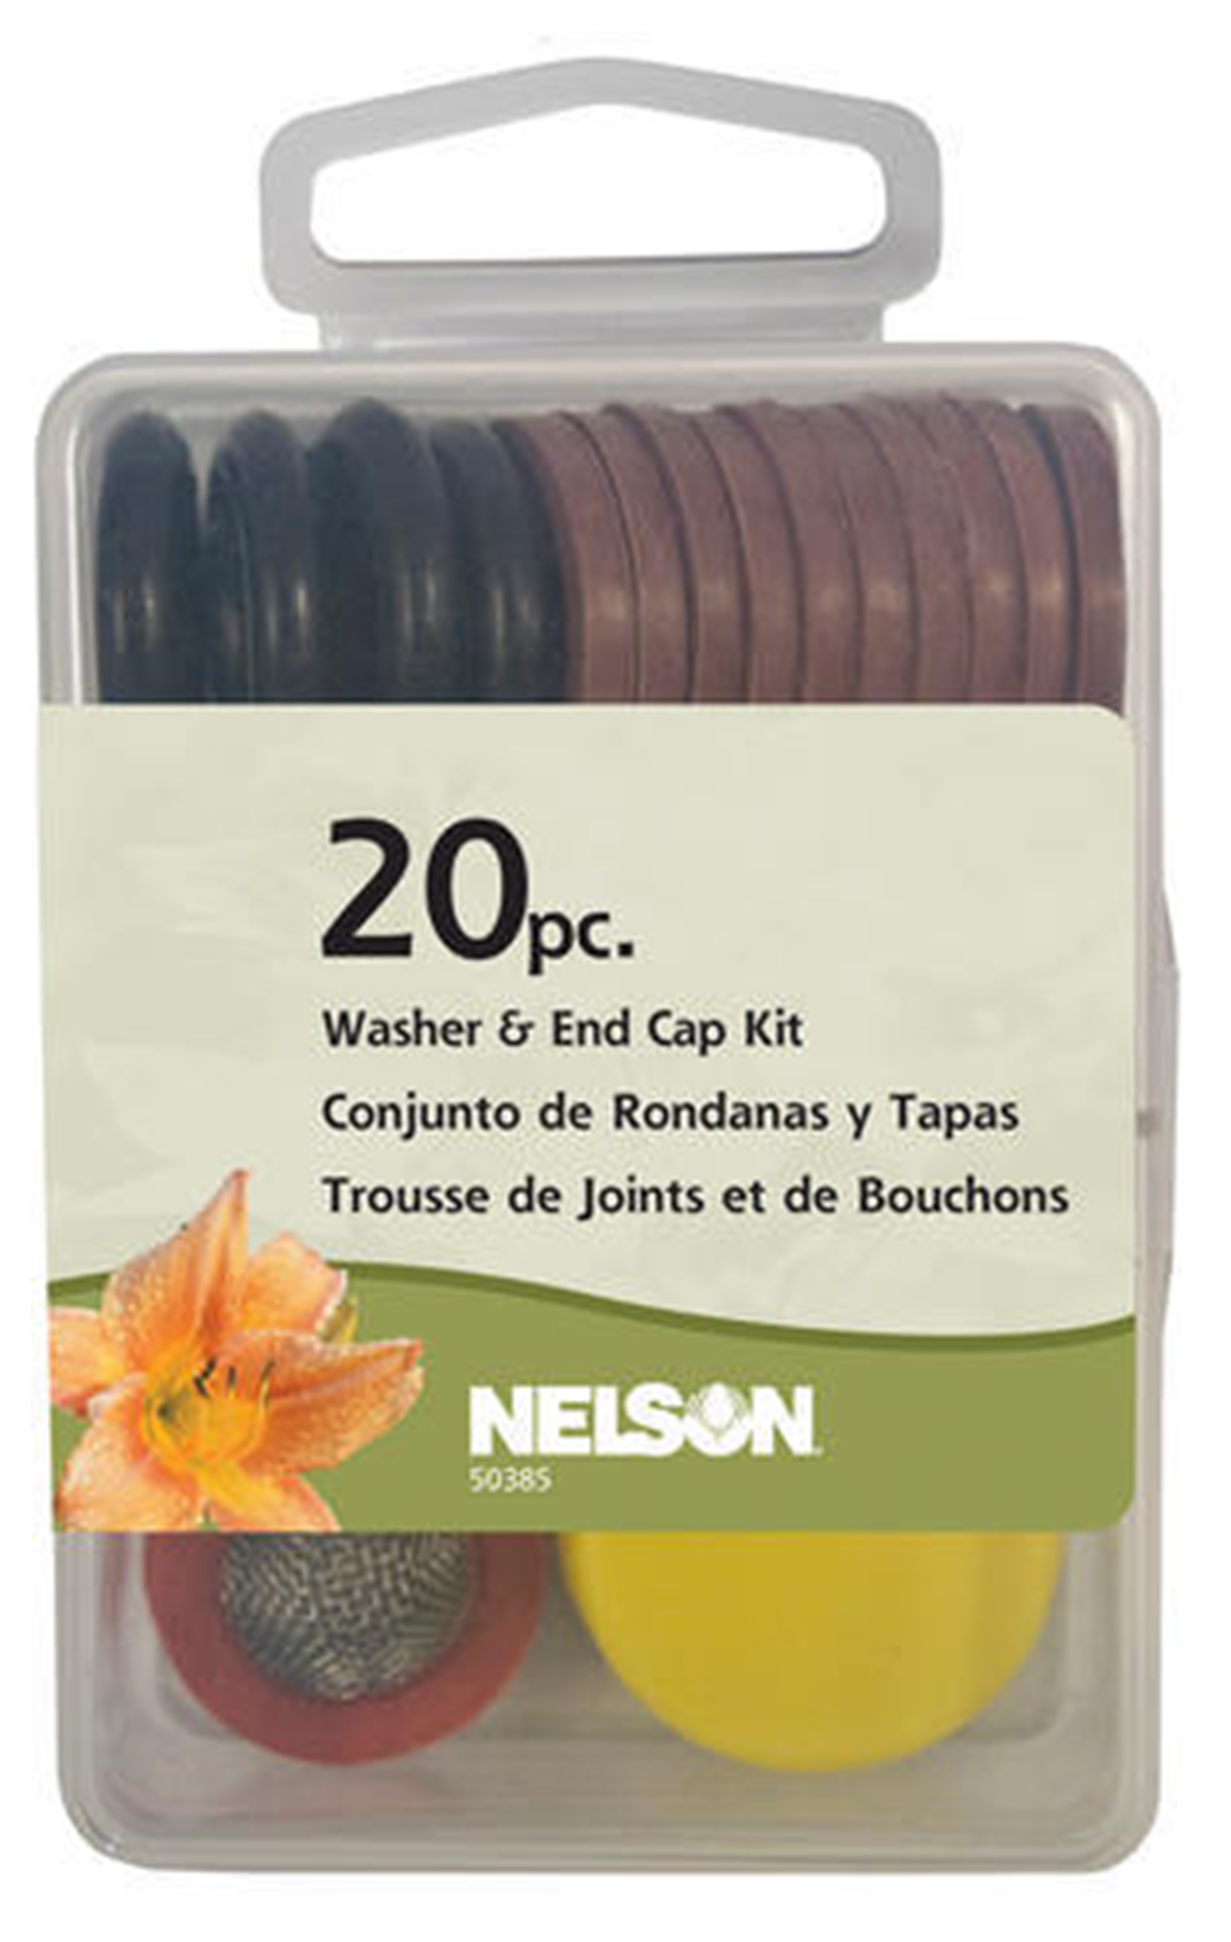 WASHER & END CAP KIT 20 PIECE NELSON